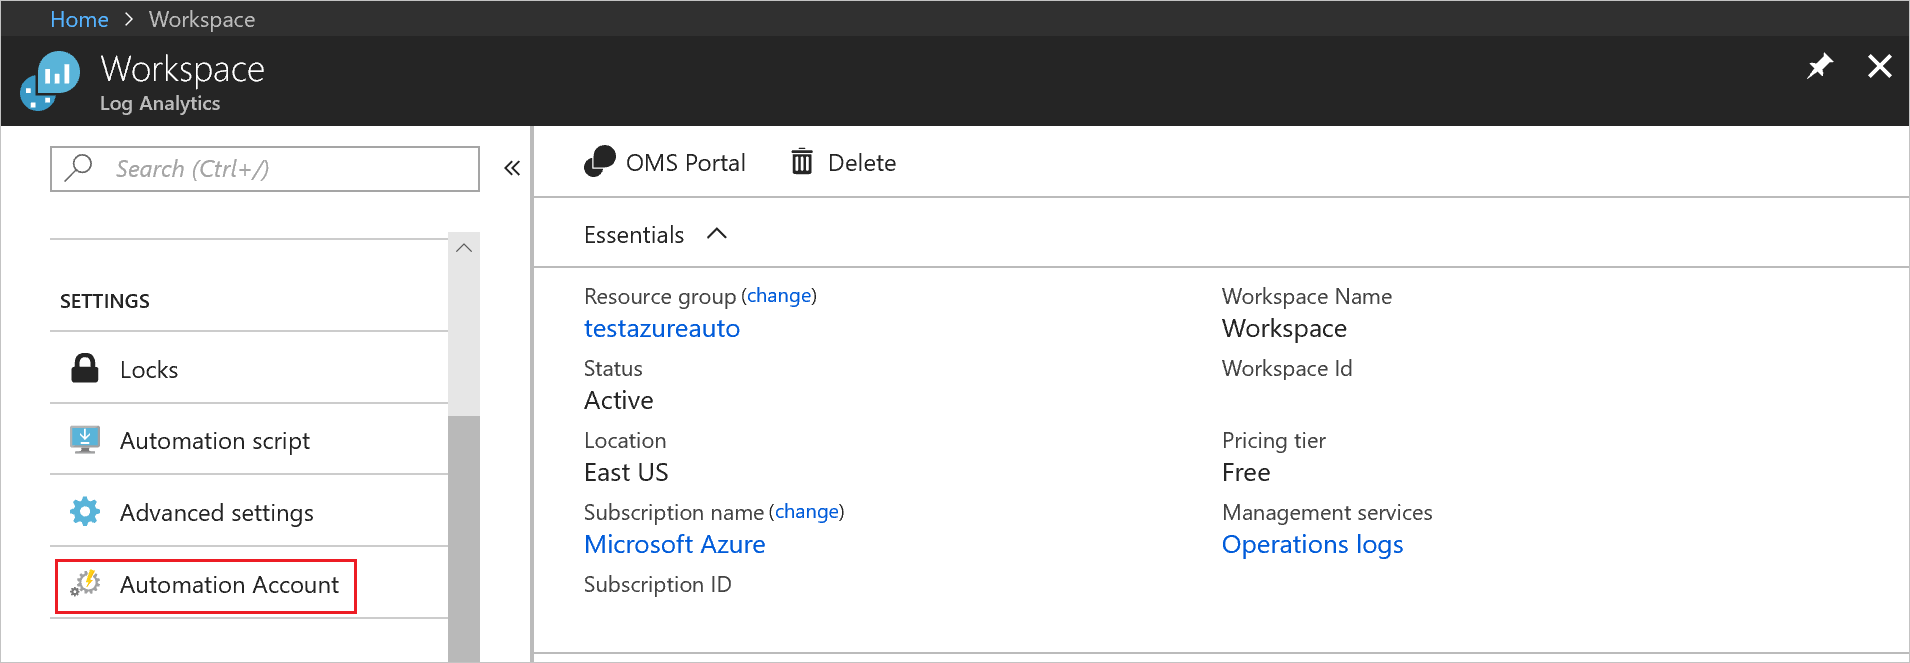 migrate-azure-monitor-logs-update-deployments-to-azure-portal